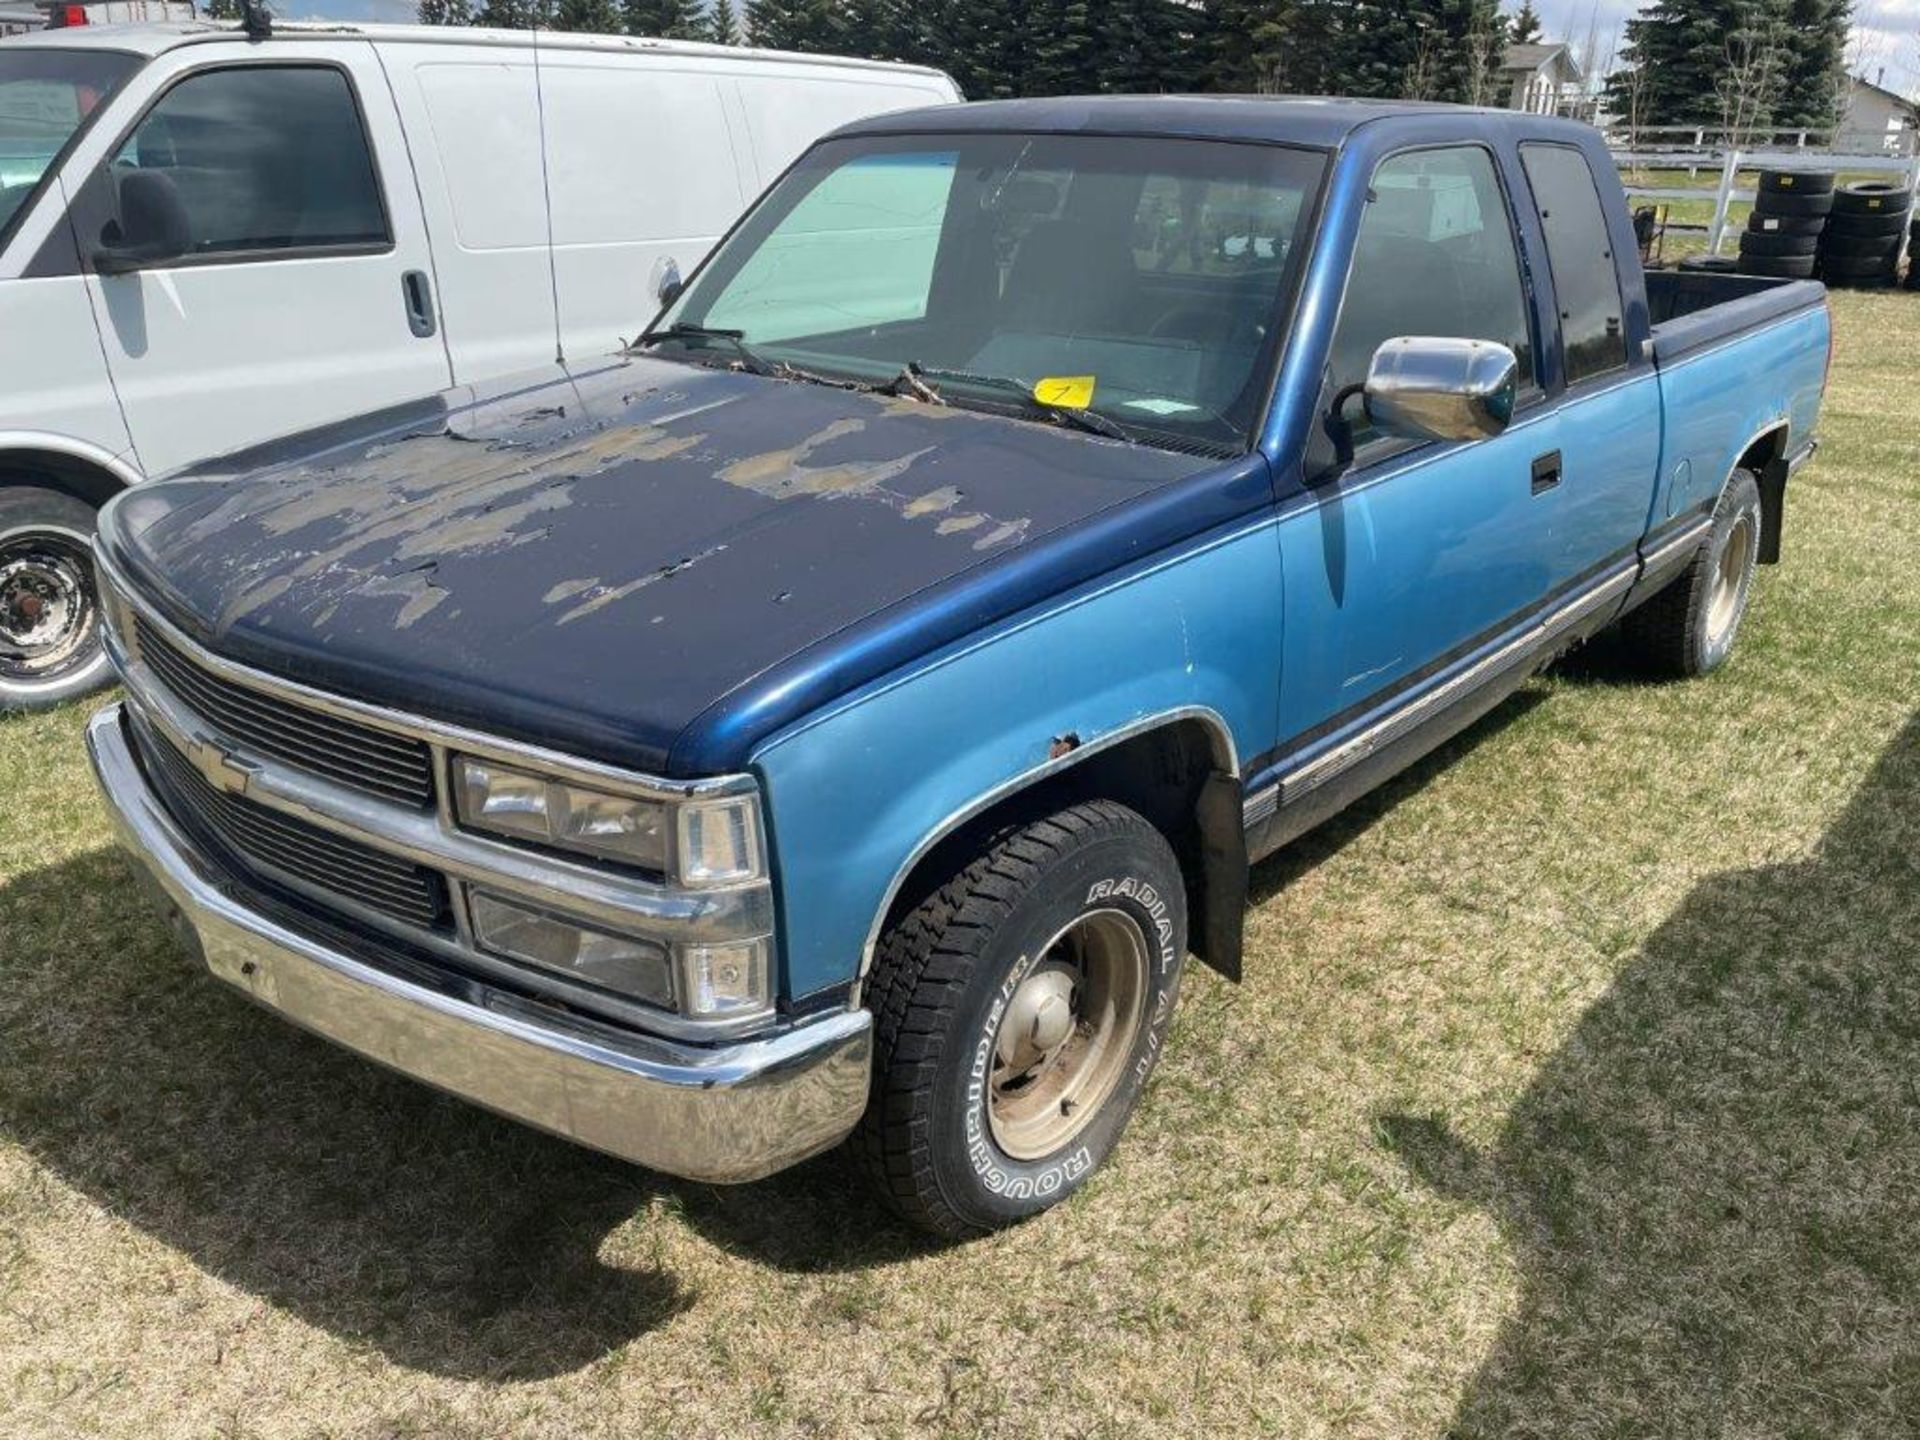 1993 CHEVROLET 1500 EXTENDED CAB PICK UP TRUCK W/ 6FT BOX, 5.7L GAS ENGINE, 250,180KM SHOWING, S/N